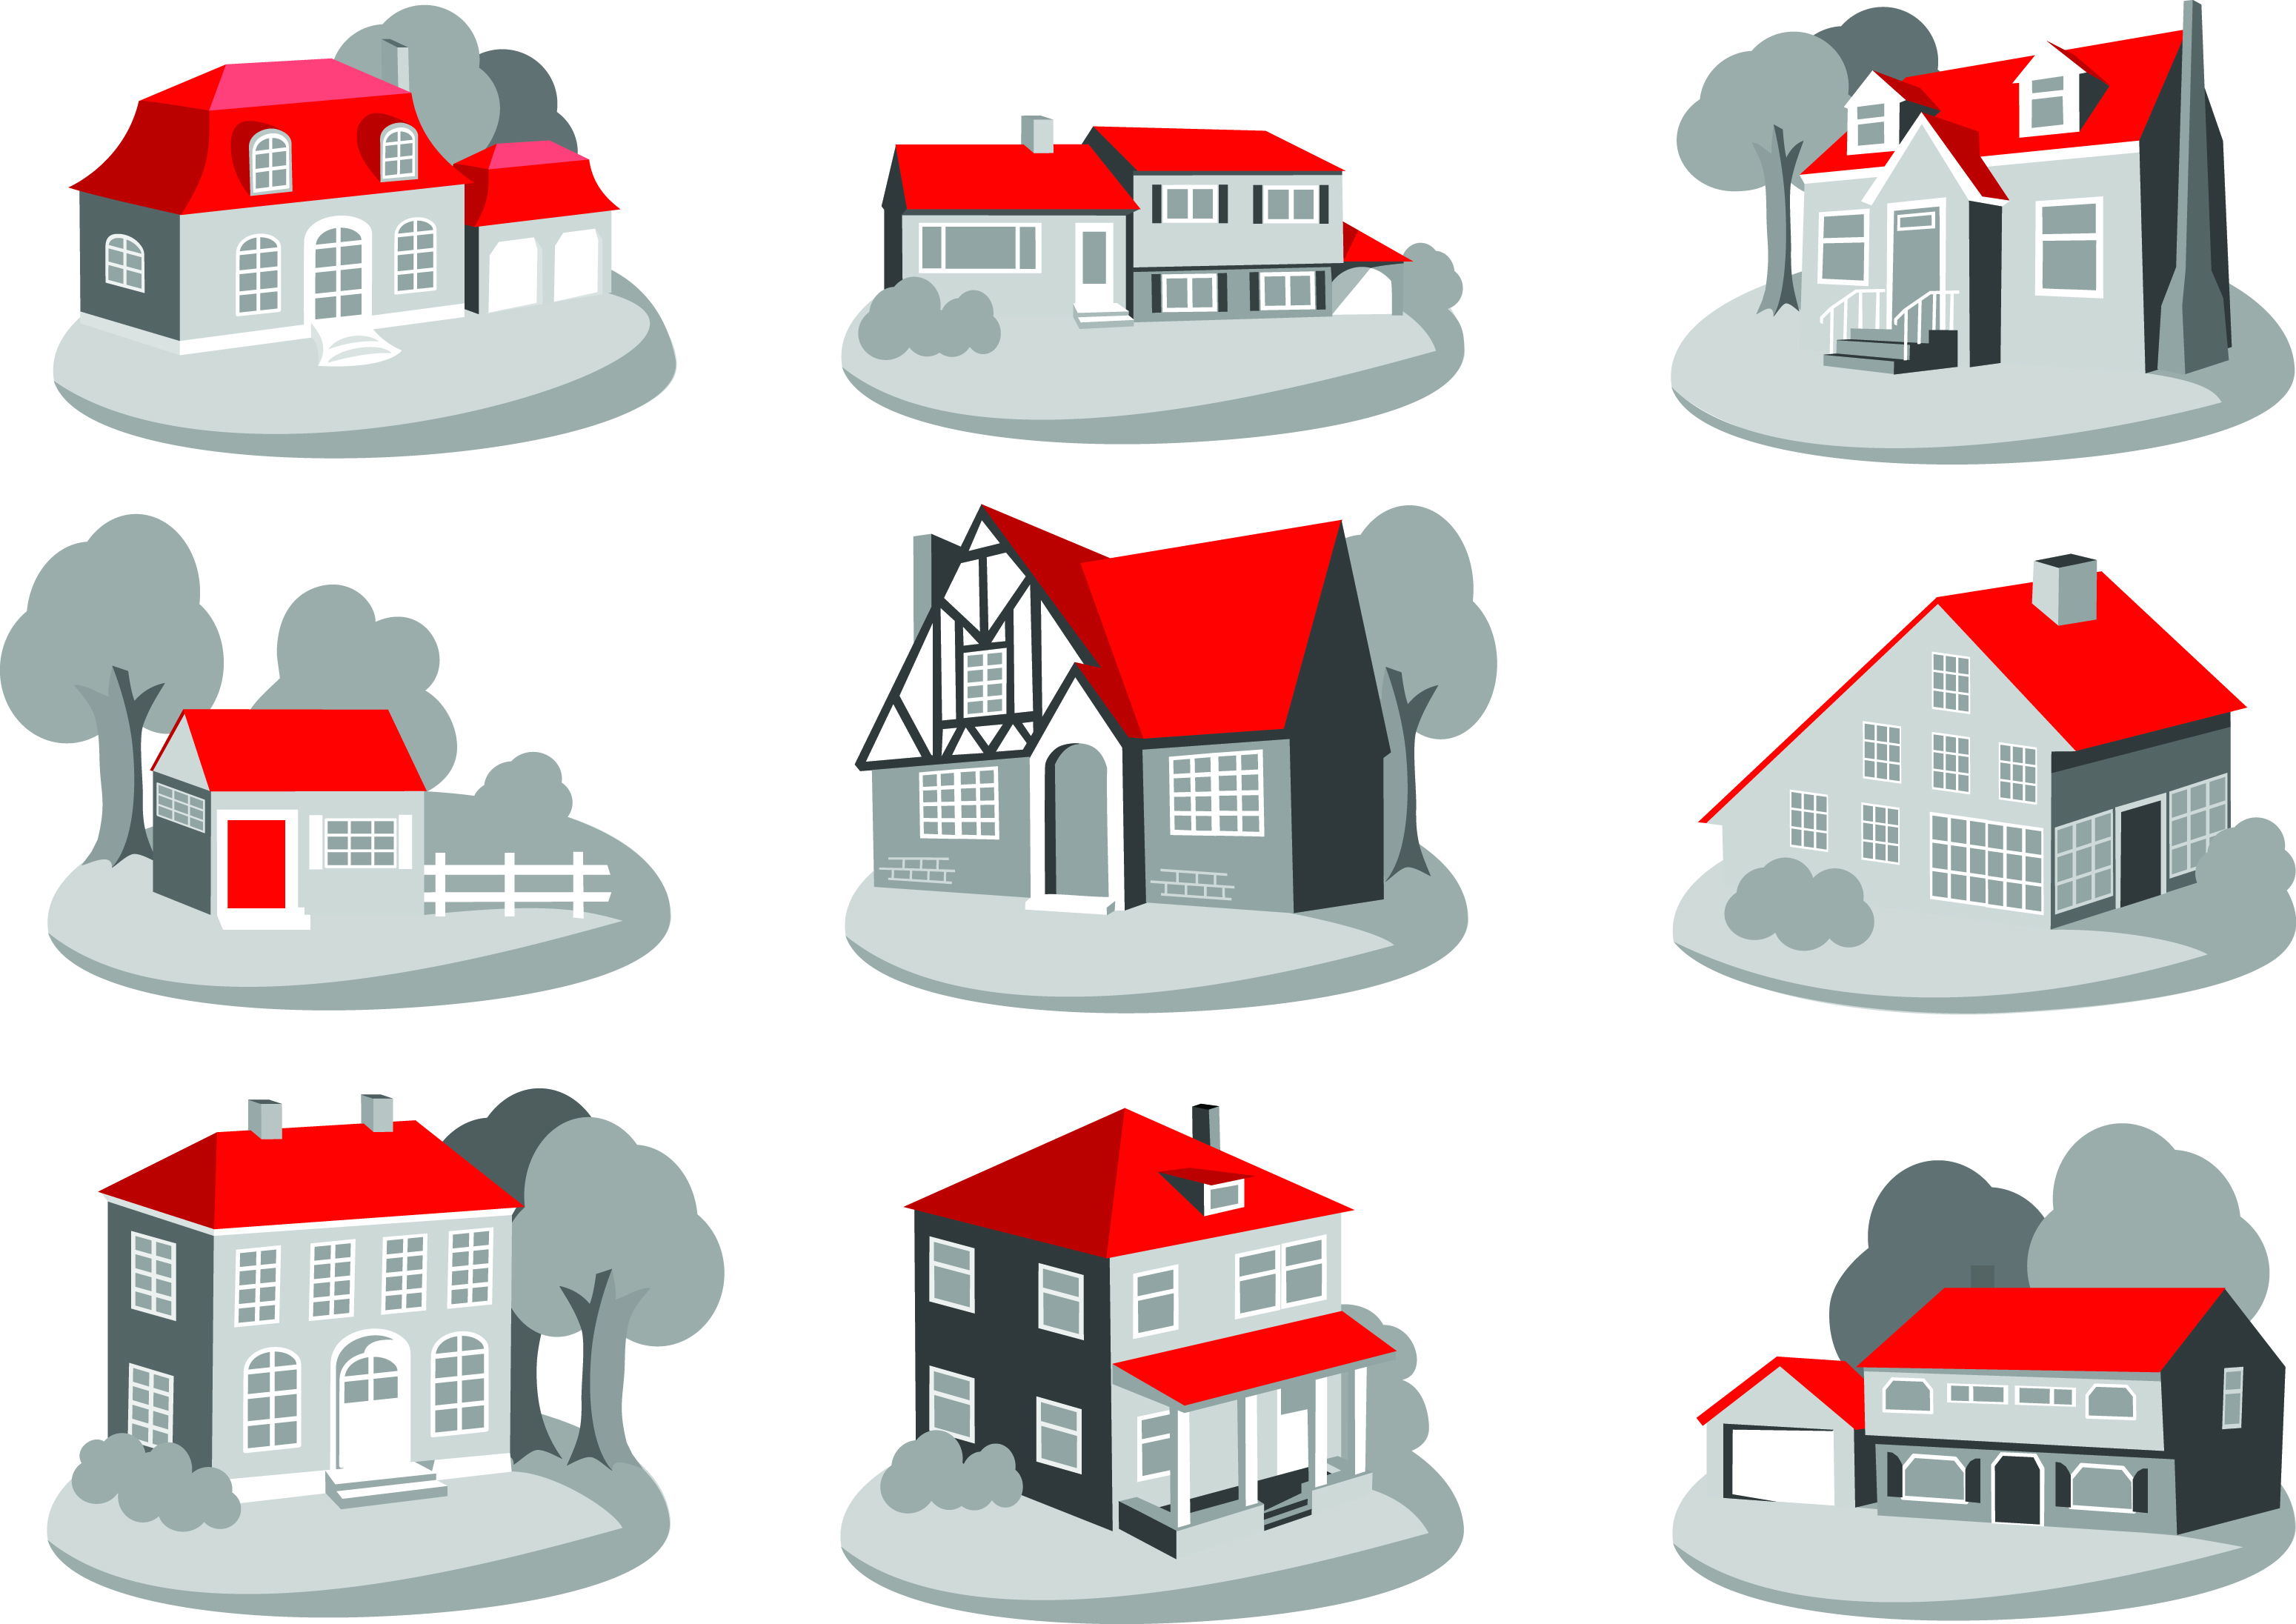 House Vector Free - ClipArt Best